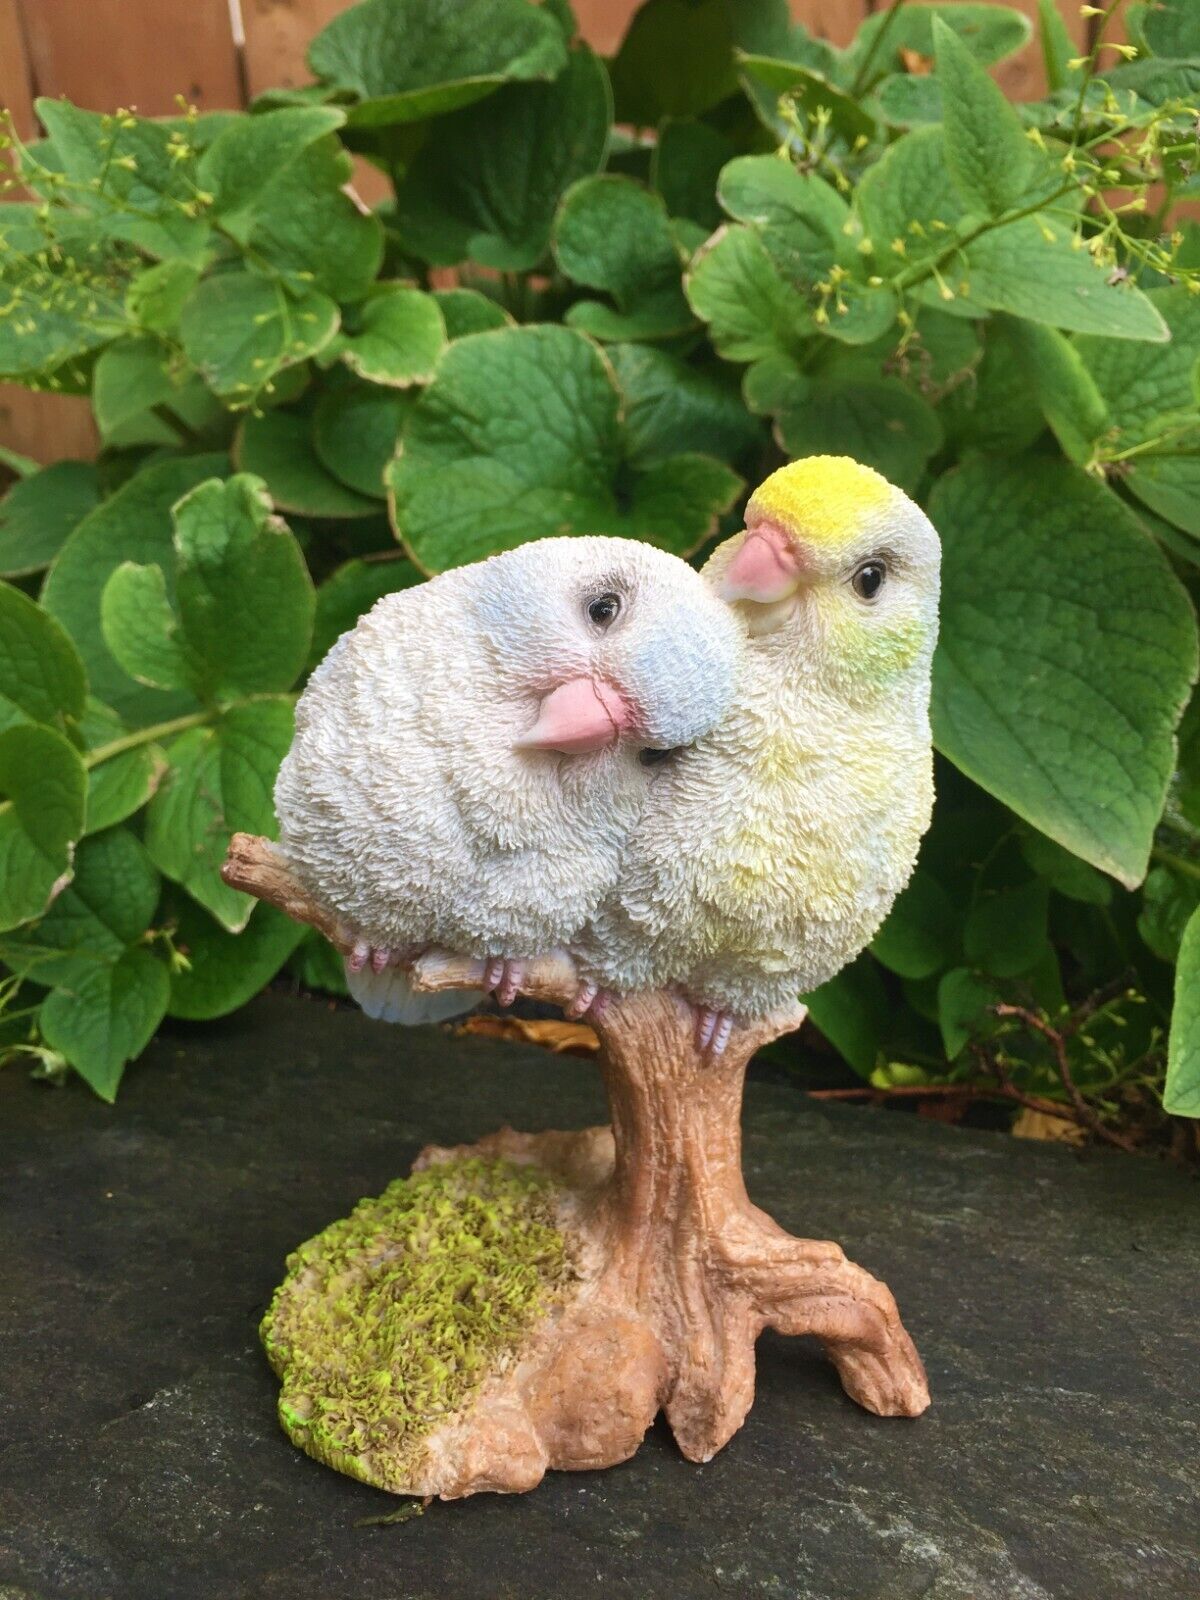 Parrot Couple Cuddling on Tree Stump 5.63 inches Resin Pacific Parrots 